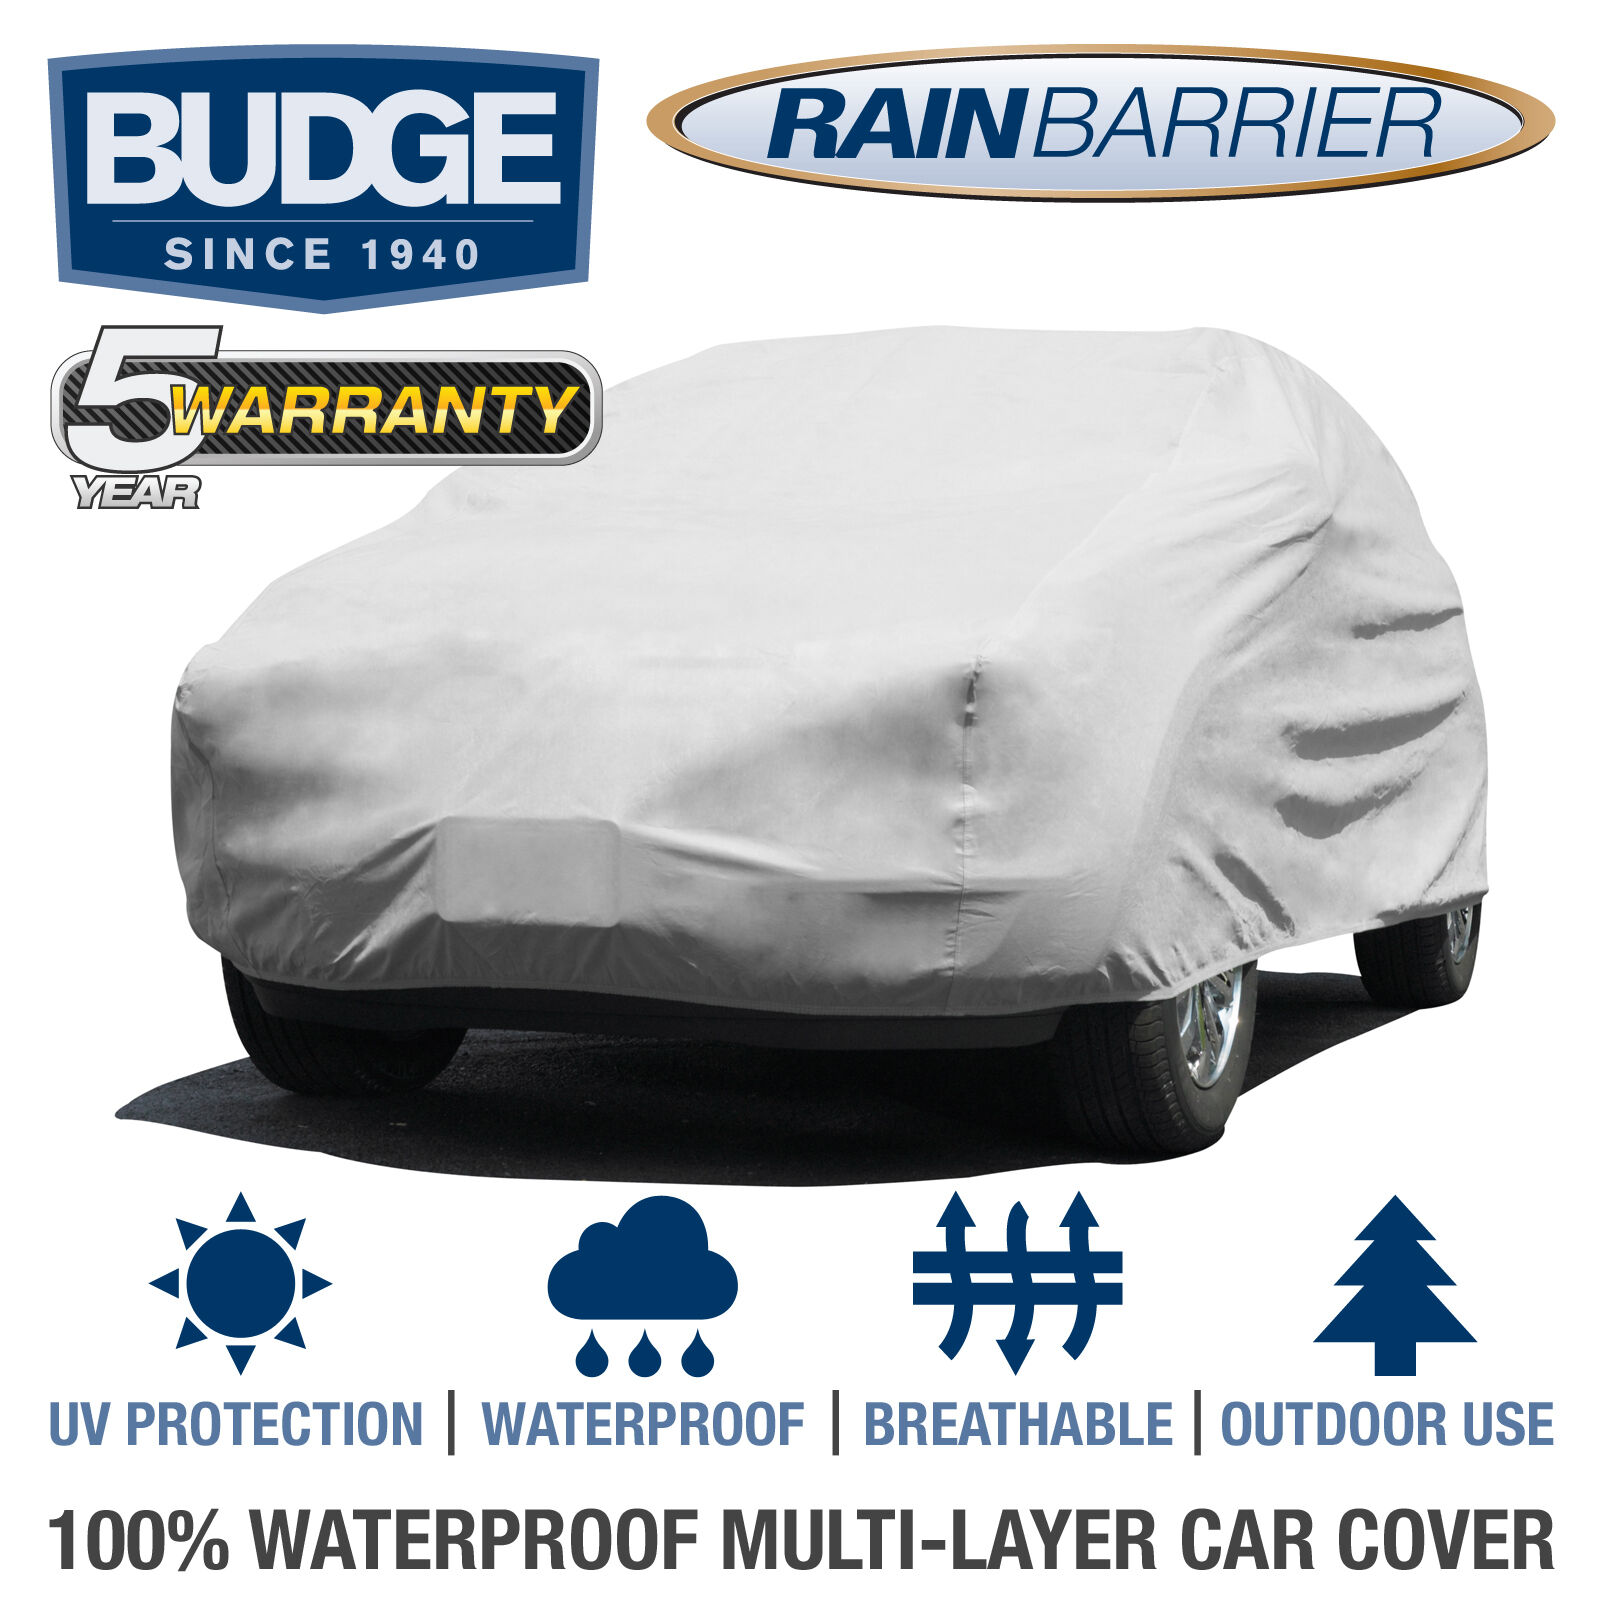 Budge Rain Barrier SUV Cover Fits Land Rover Range Rover 2006 | Waterproof